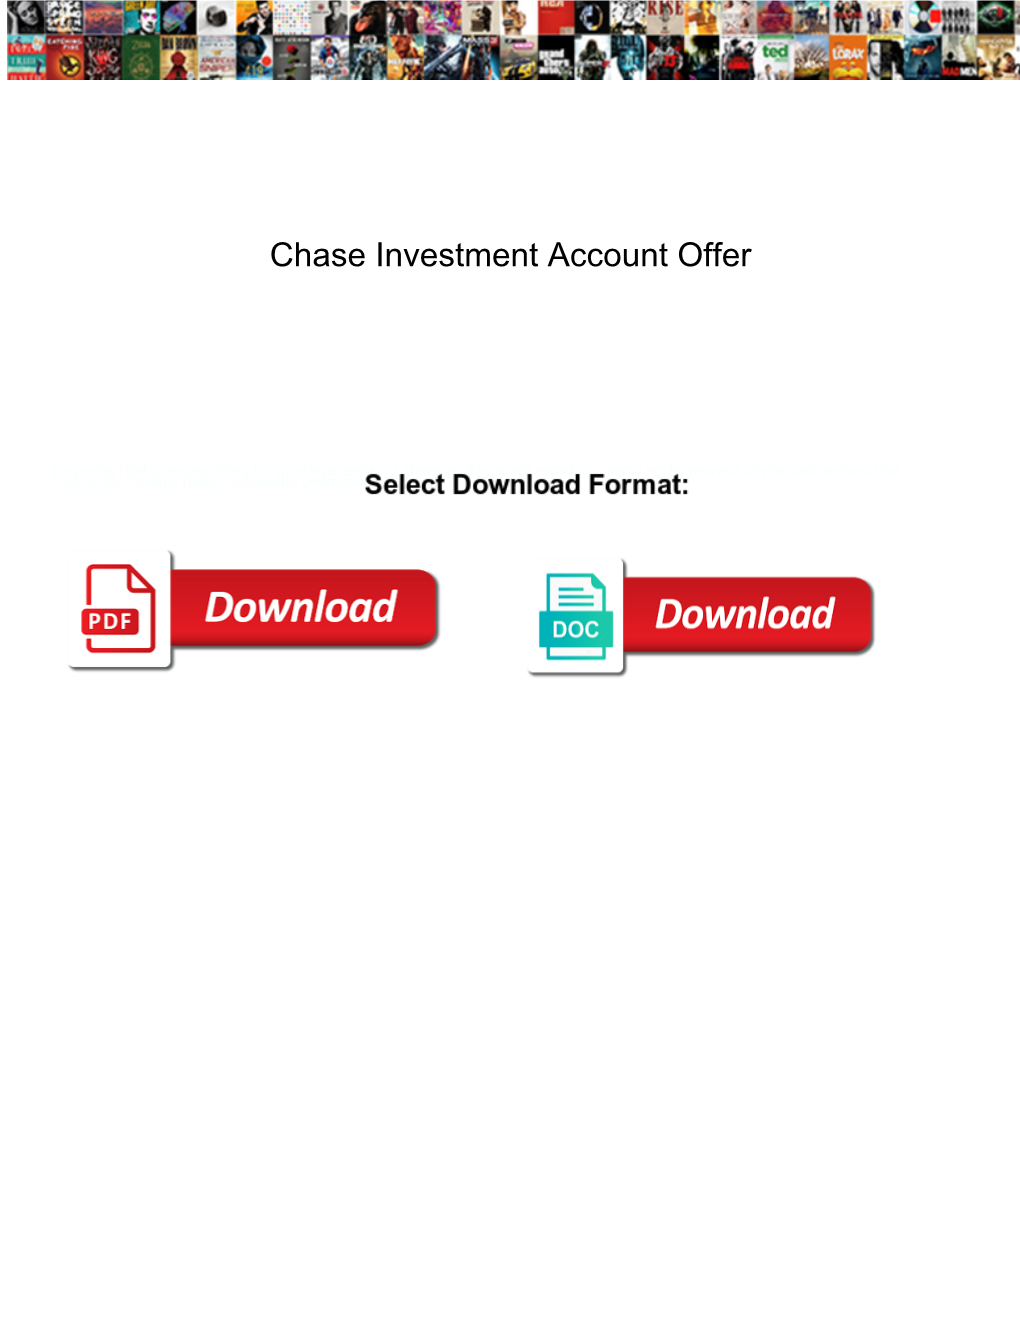 Chase Investment Account Offer